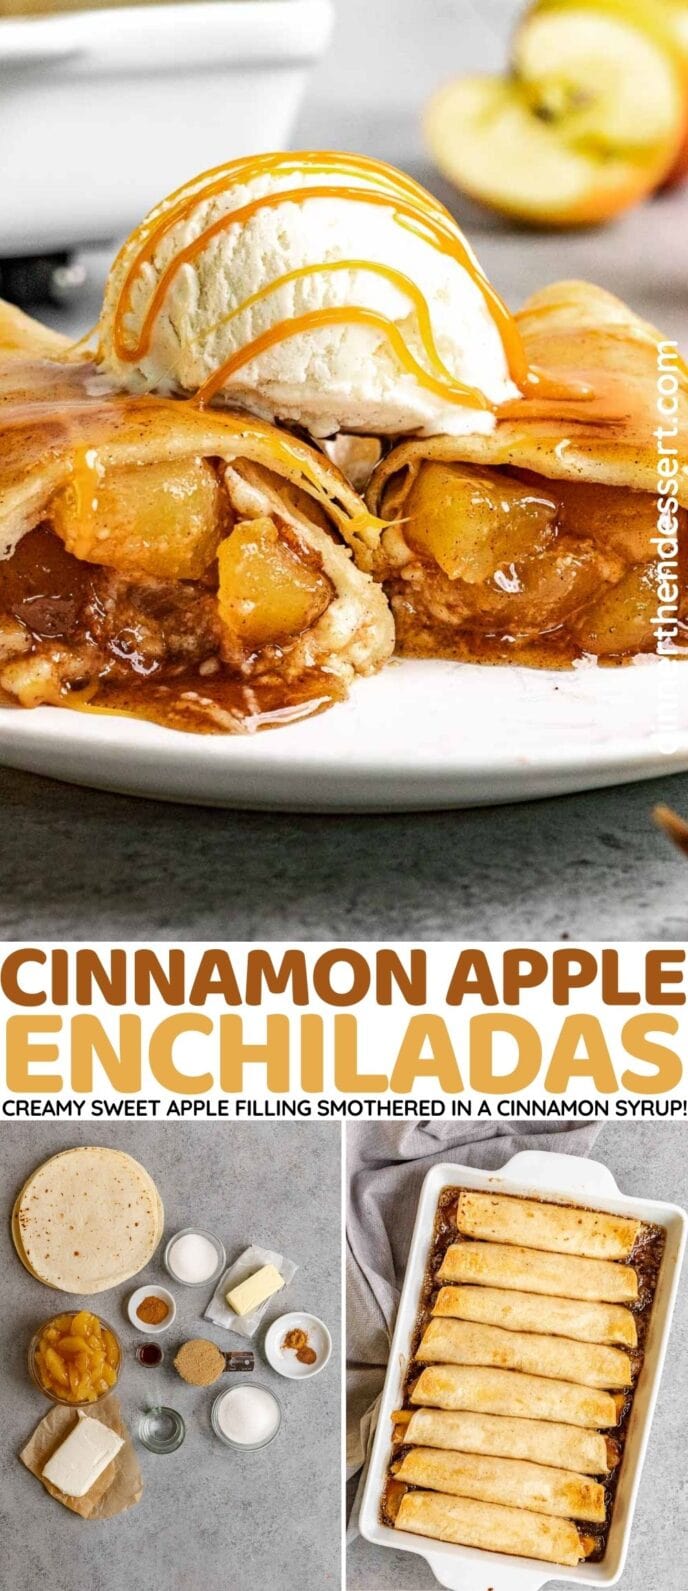 Cinnamon Apple Enchiladas two on plate topped with ice cream and caramel sauce collage